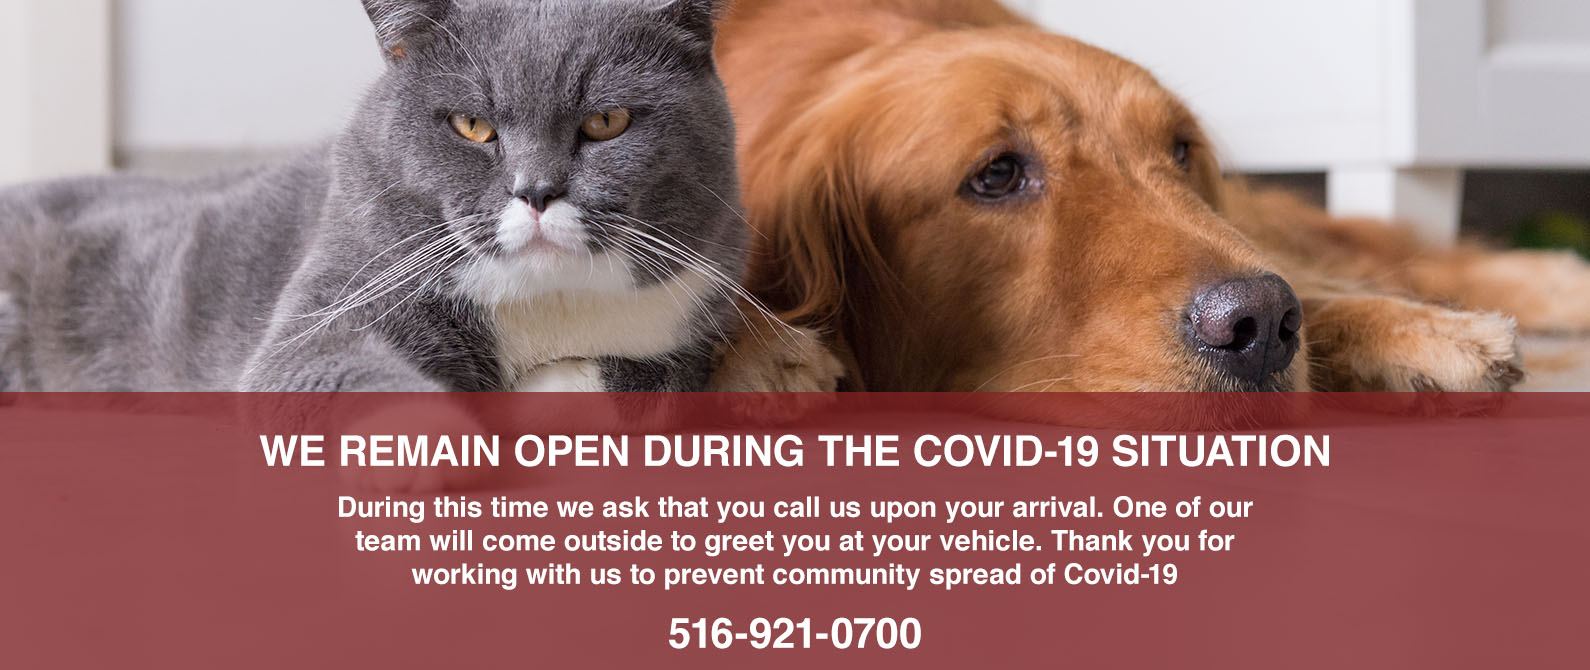 Open During the Covid-19 Situation